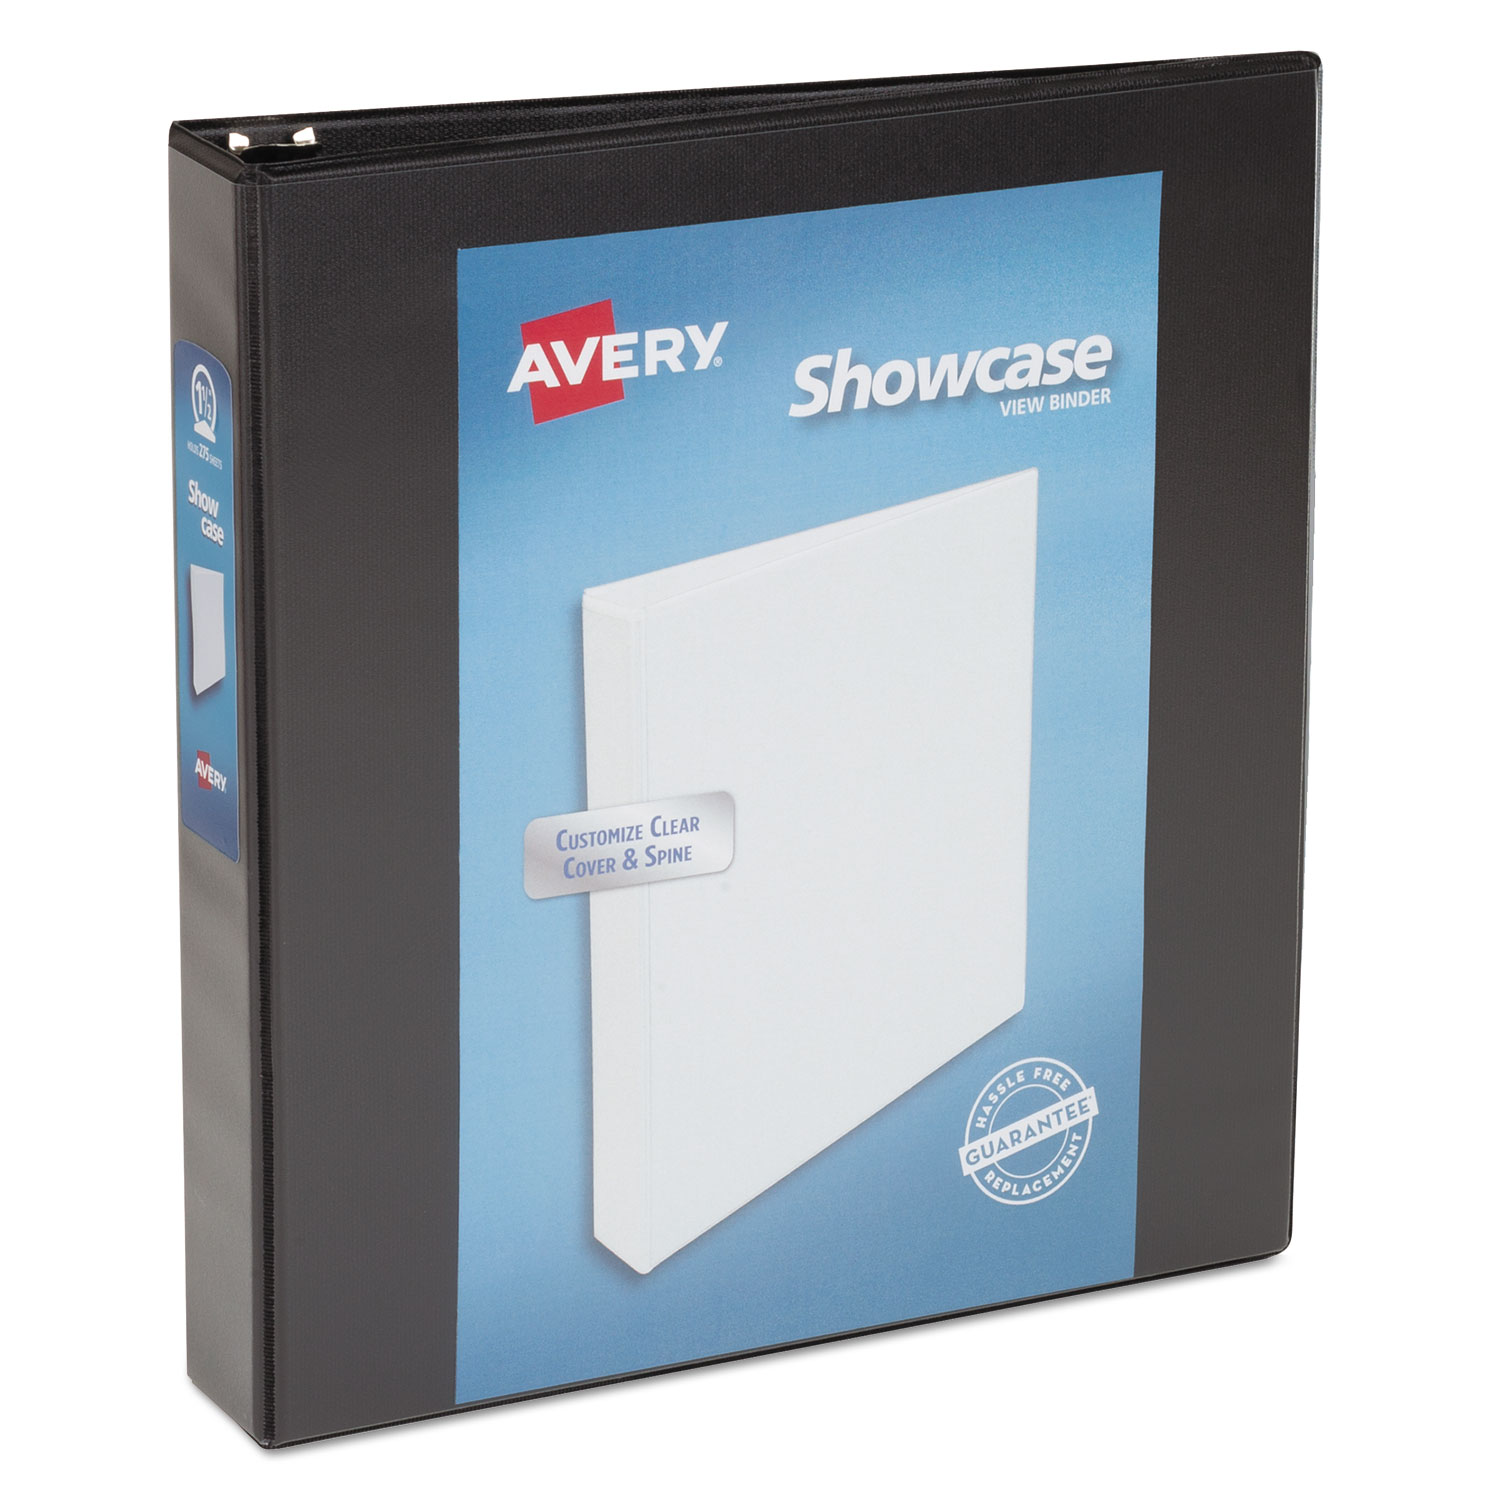  Avery 19650 Showcase Economy View Binder with Round Rings, 3 Rings, 1.5 Capacity, 11 x 8.5, Black (AVE19650) 